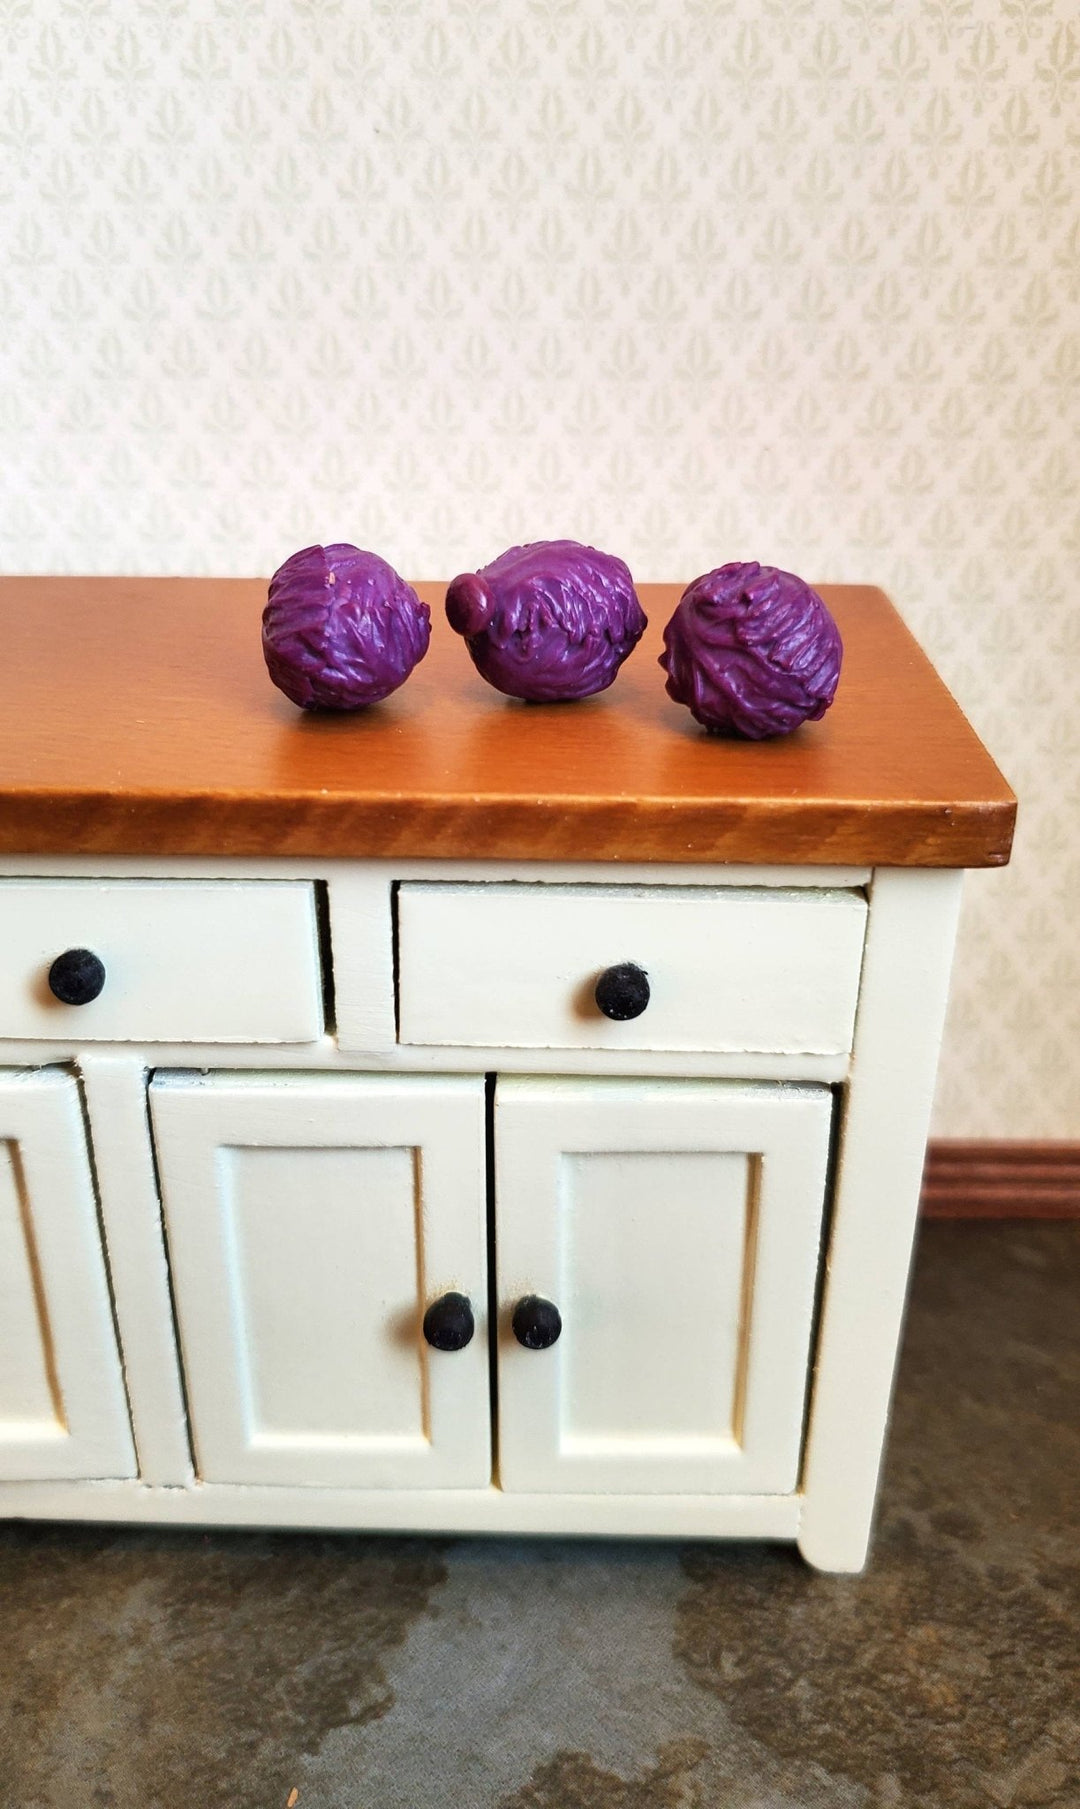 Dollhouse Miniature Red Cabbage 3 Heads 1:12 Scale Kitchen Food Vegetables - Miniature Crush